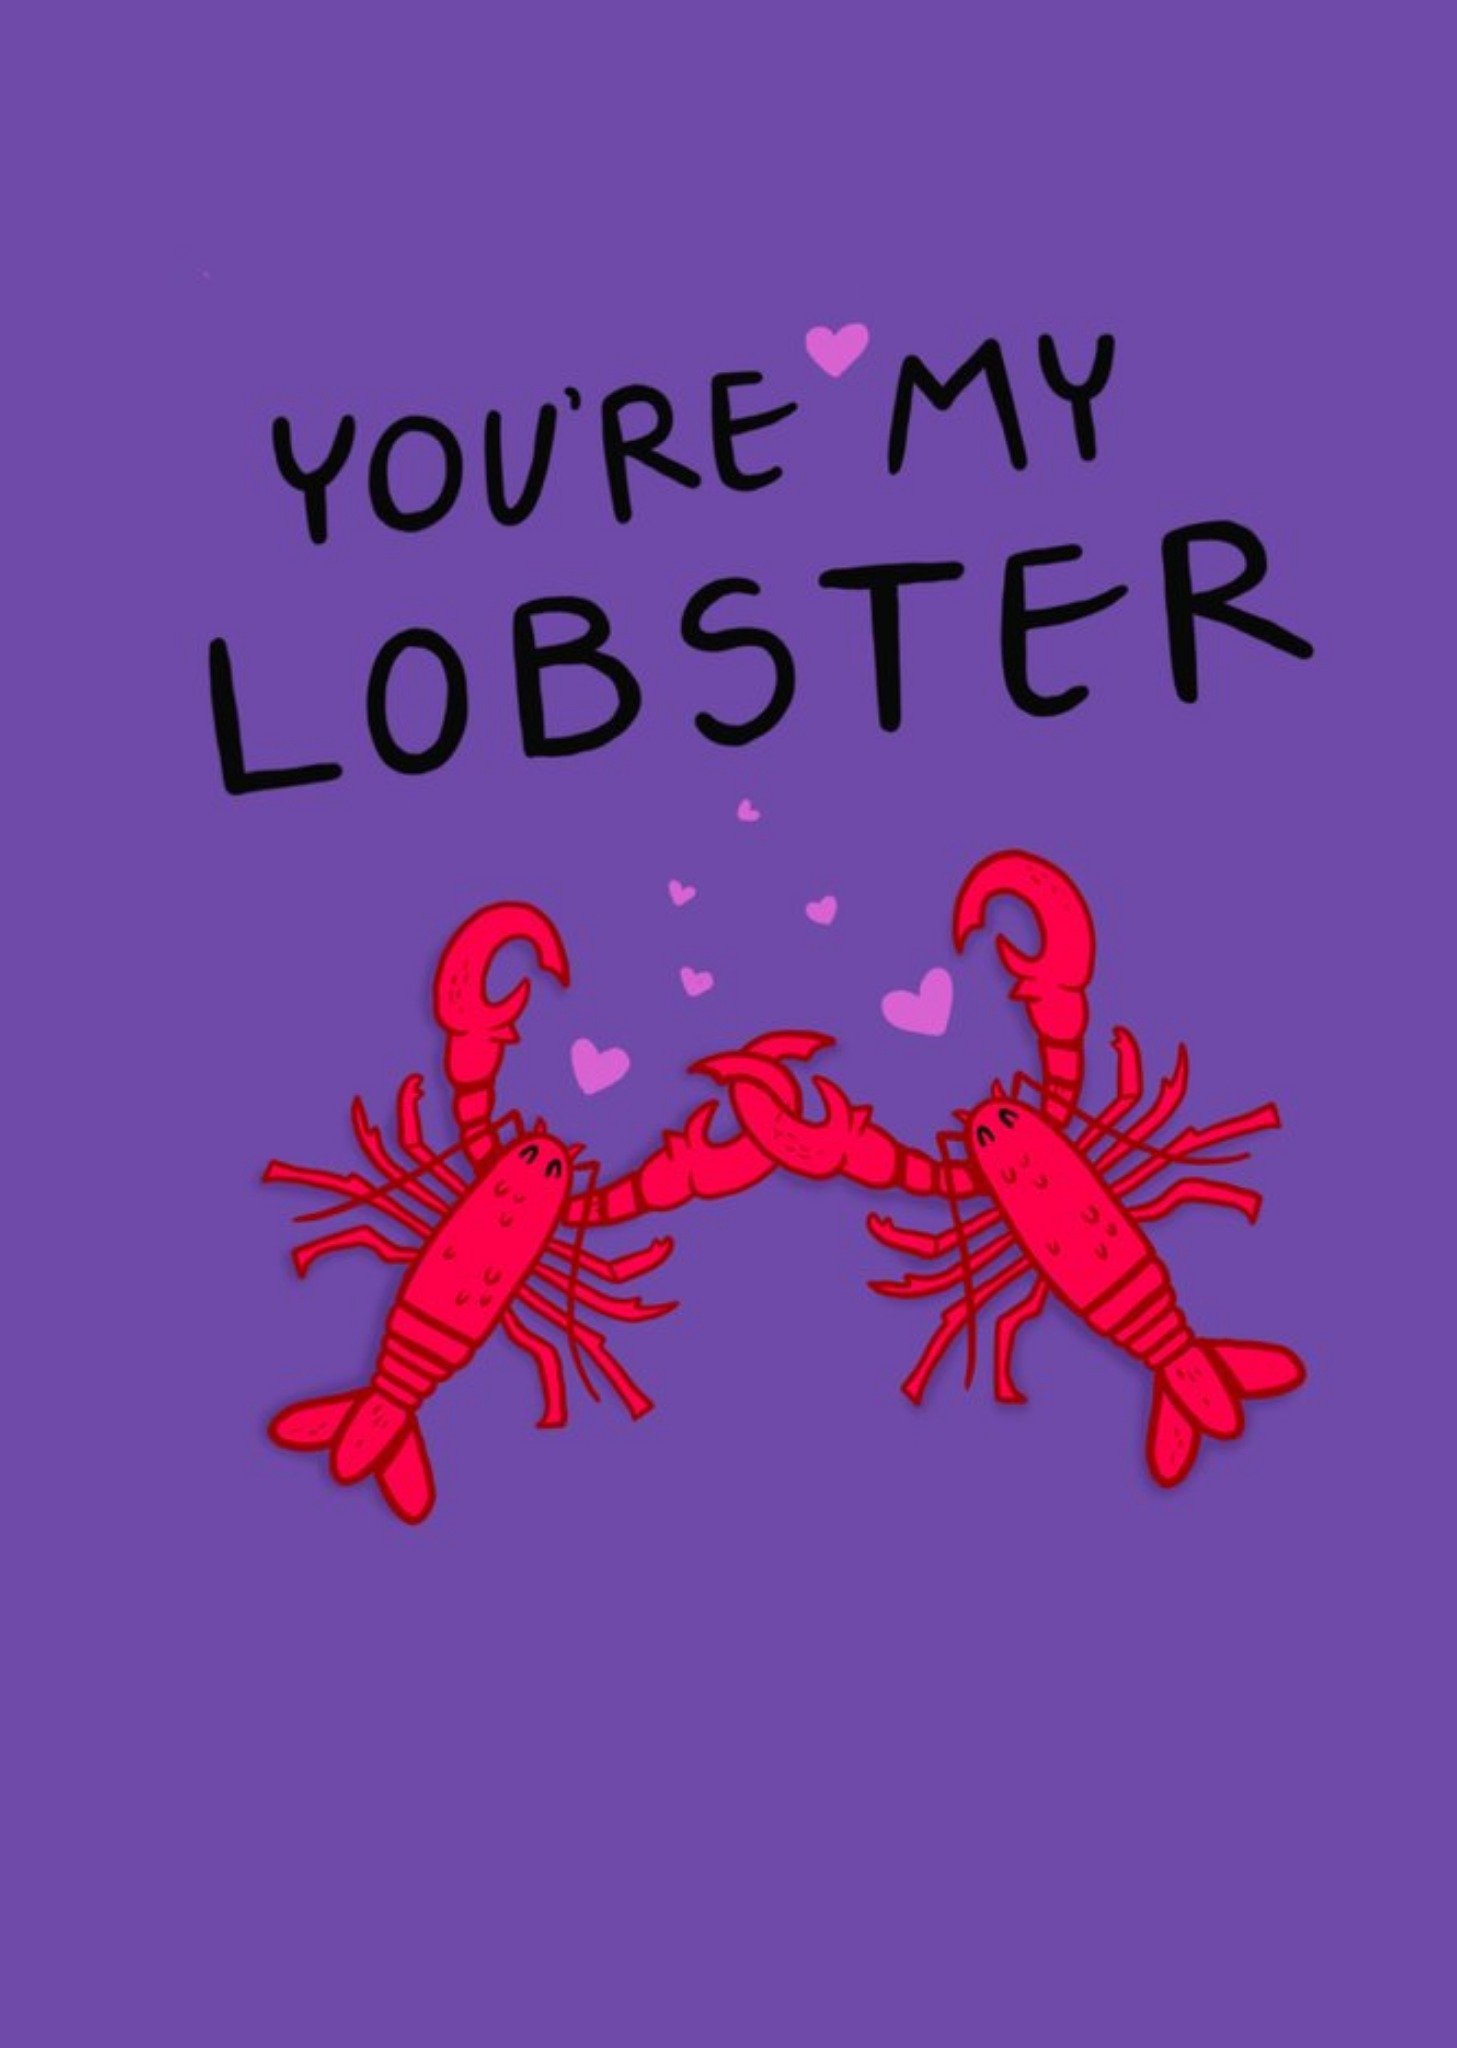 Moonpig Illustration Of A Pair Of Lobsters On A Purple Background You're My Lobster Card Ecard